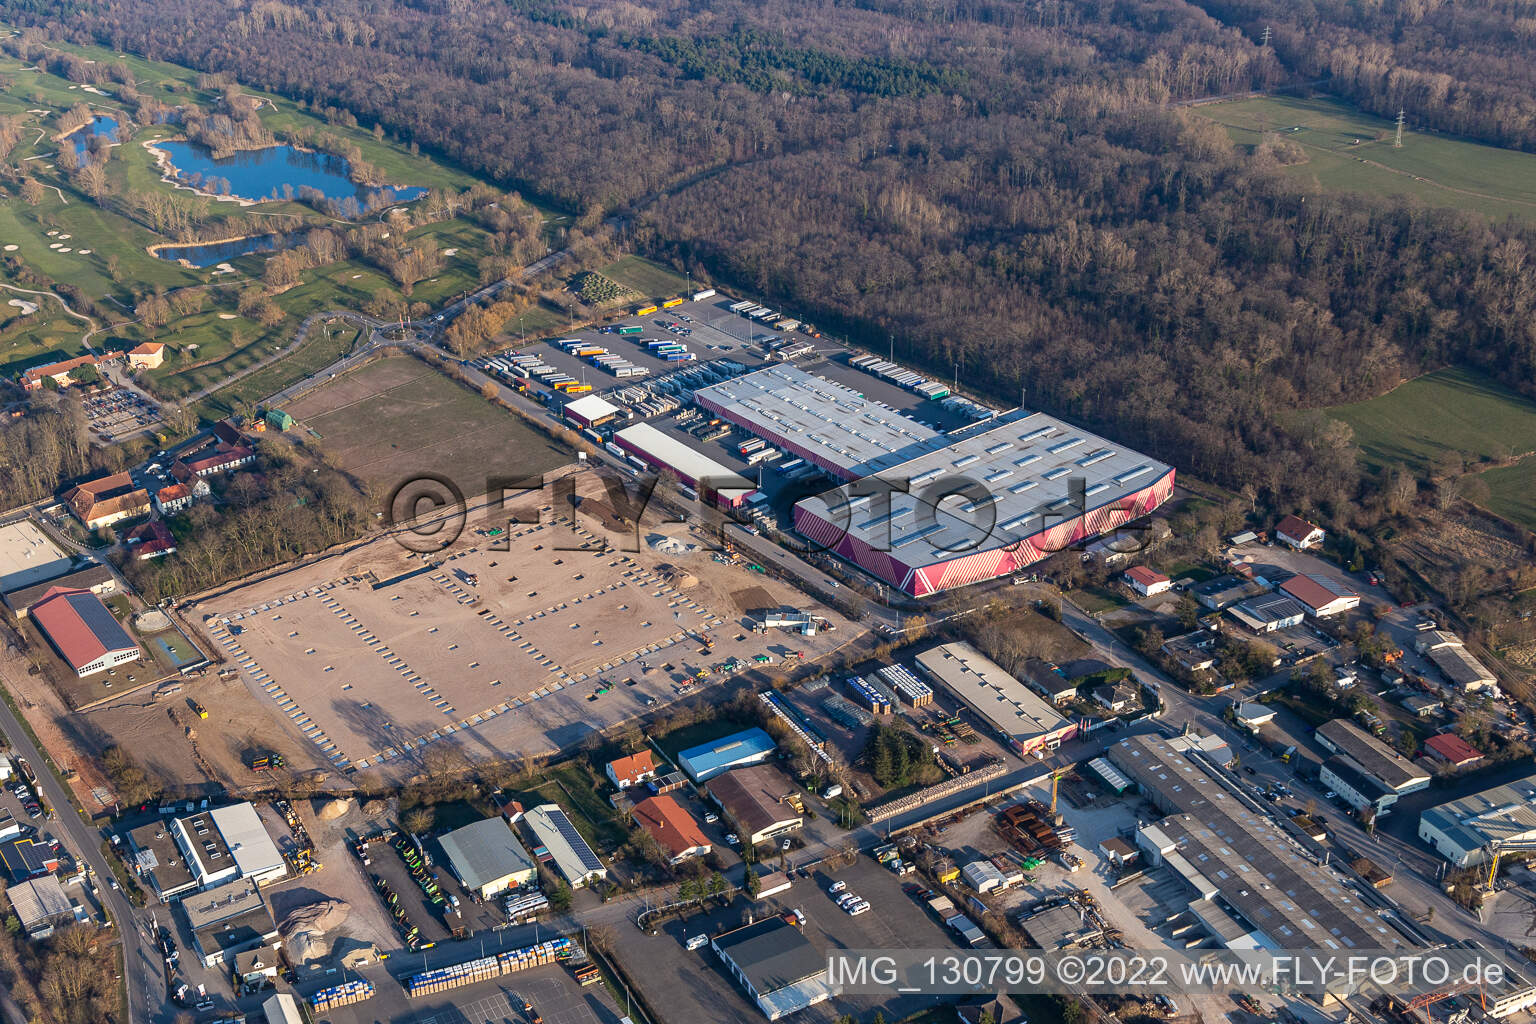 Aerial view of Construction site for new Hornbach logistics center Essingen in Essingen in the state Rhineland-Palatinate, Germany